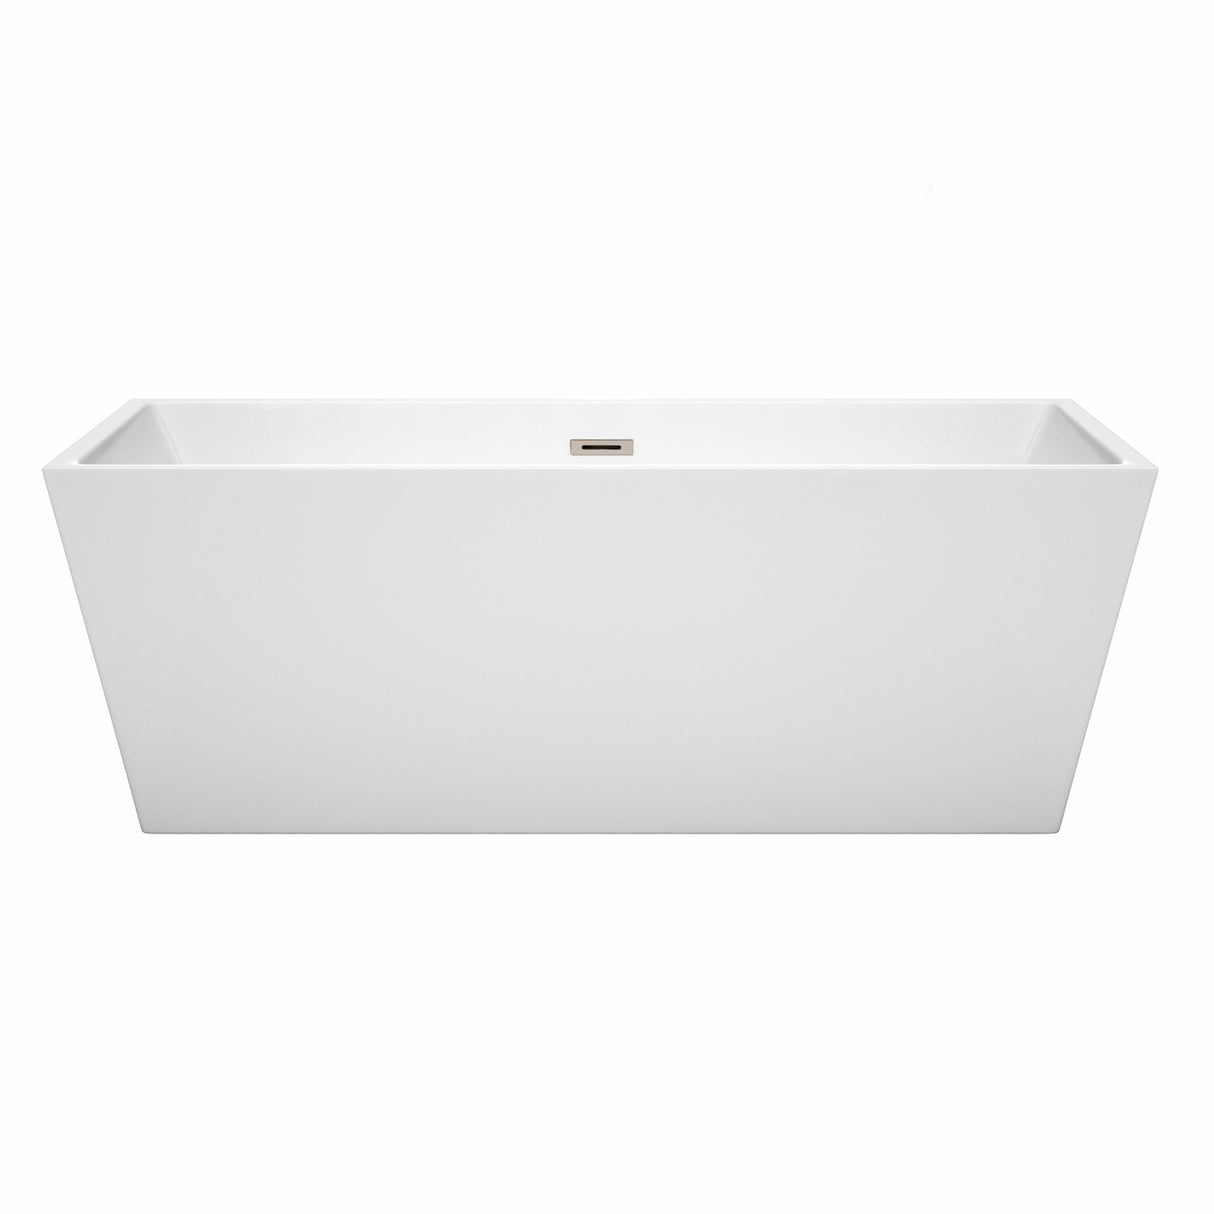 Sara 67 Inch Freestanding Bathtub in White with Brushed Nickel Drain and Overflow Trim